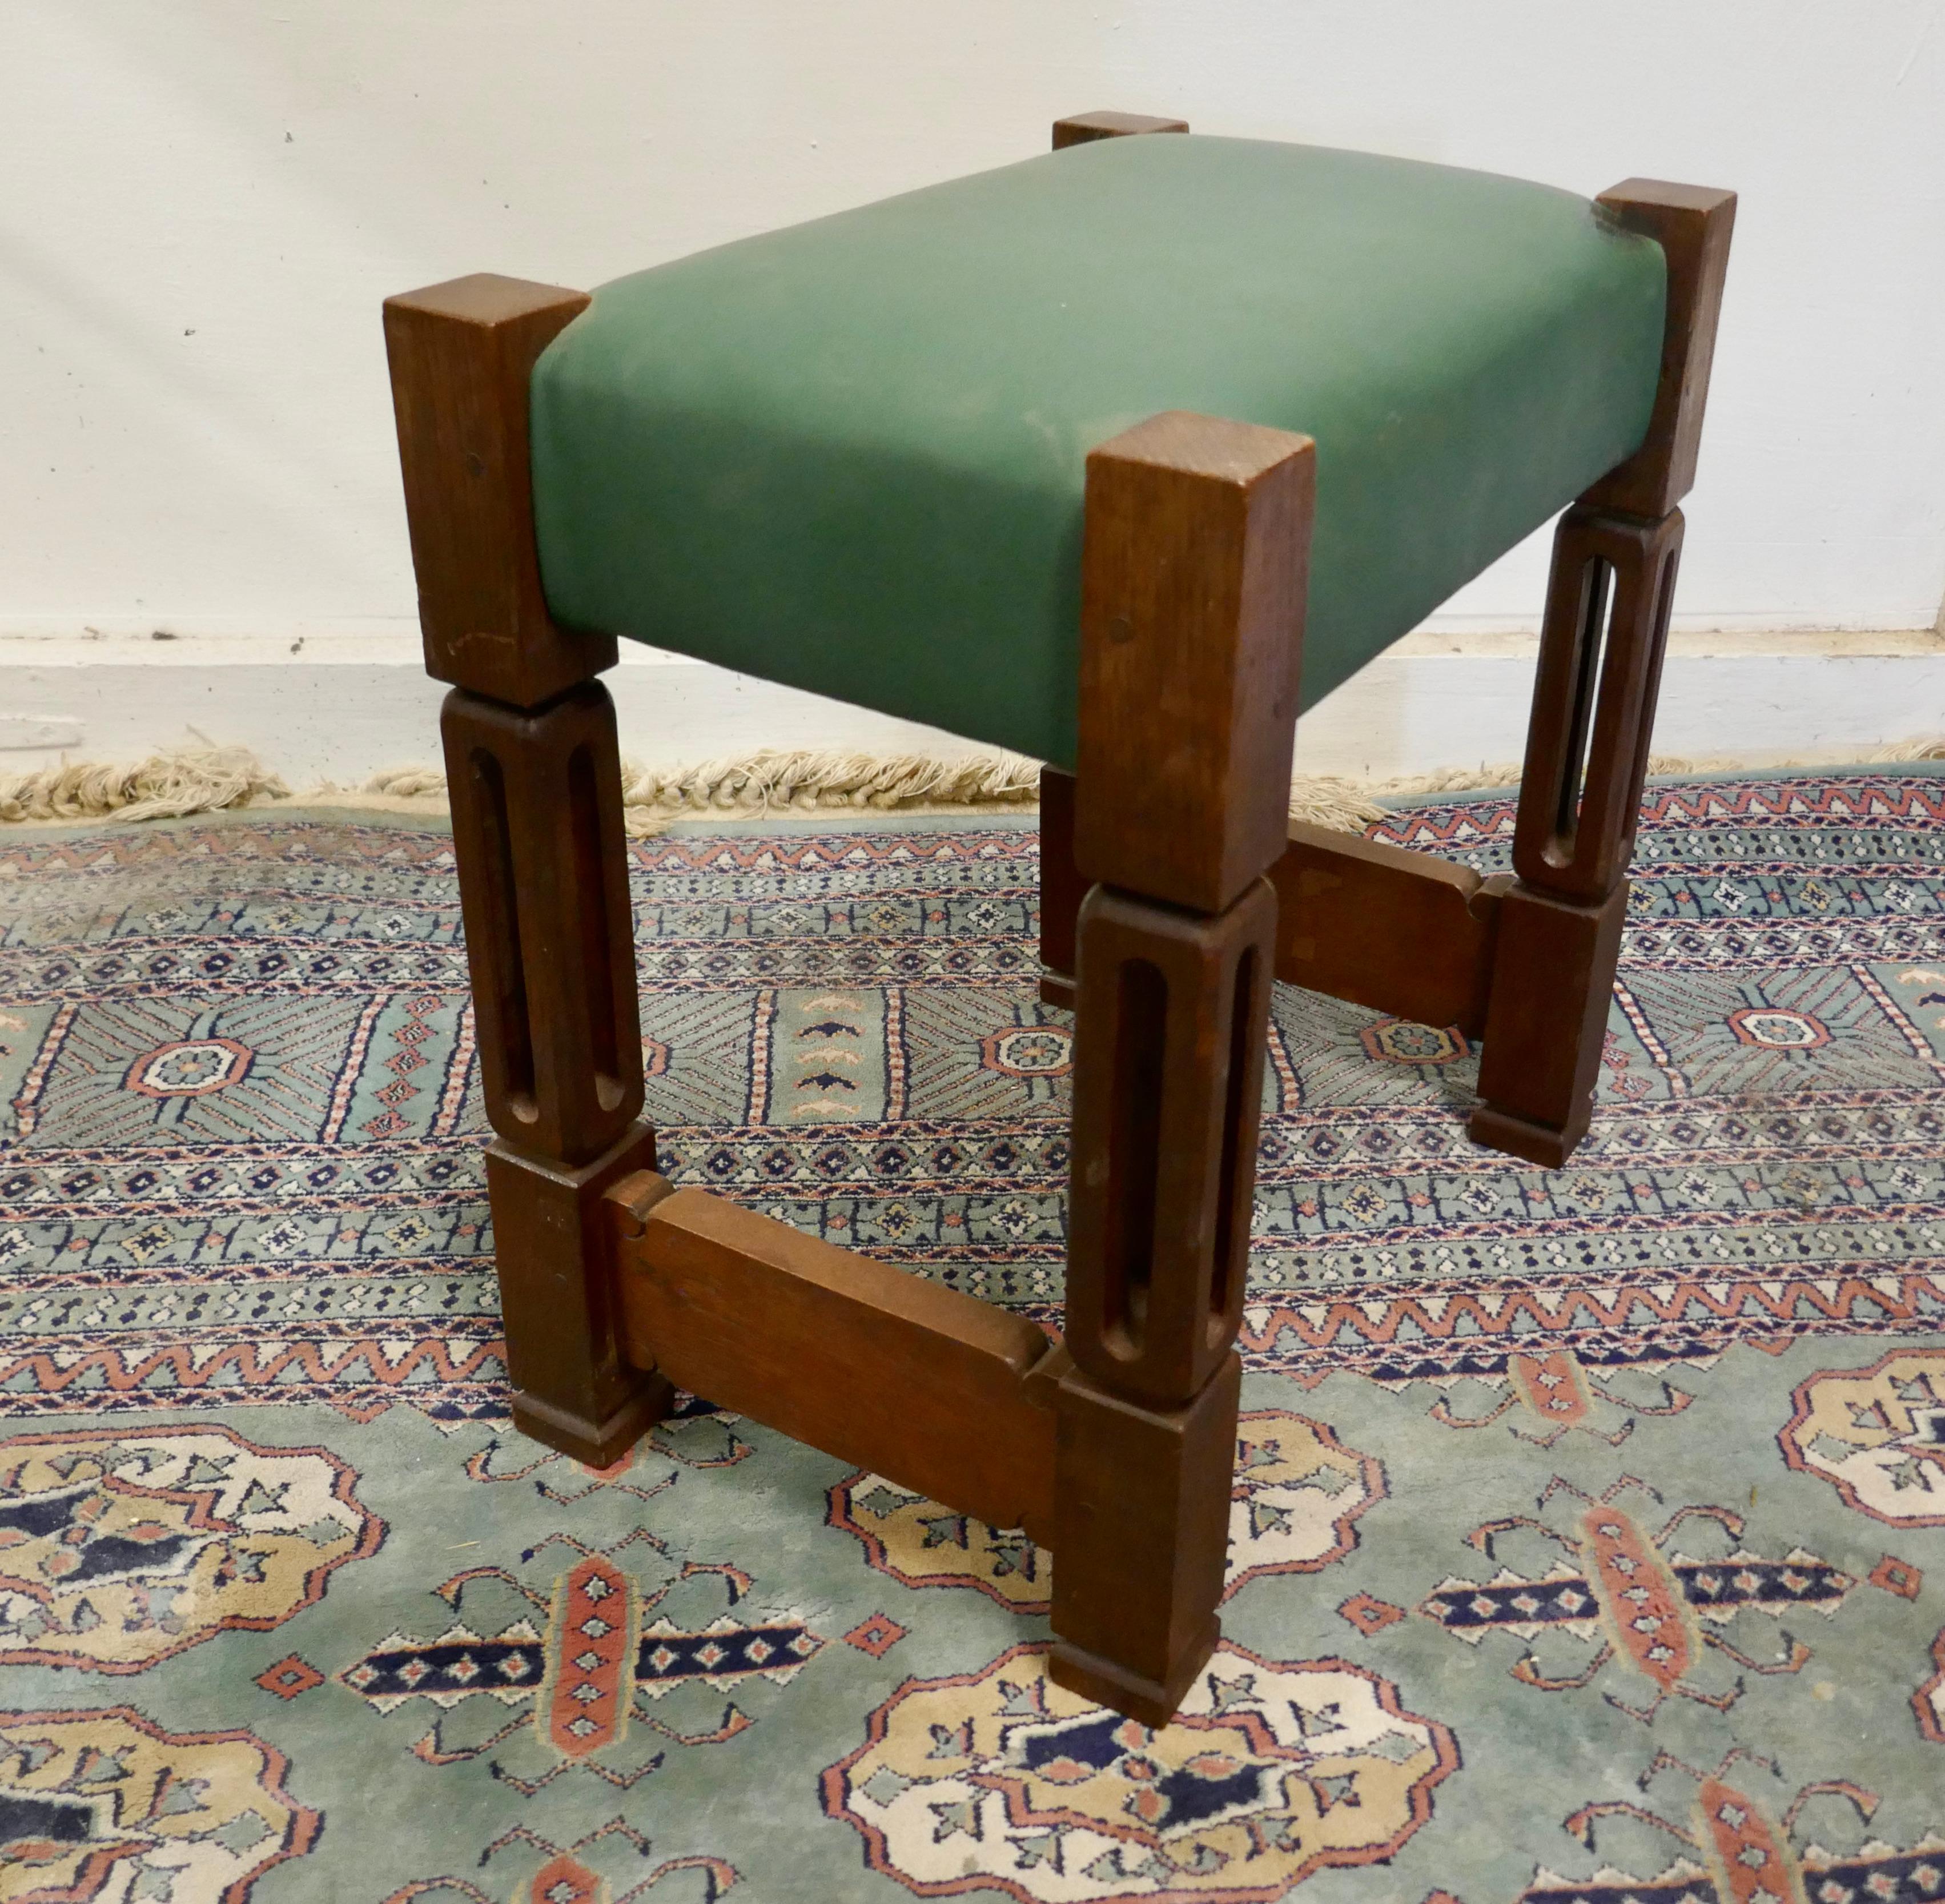 20th Century Stylish Arts and Crafts Oak and Leather Stool